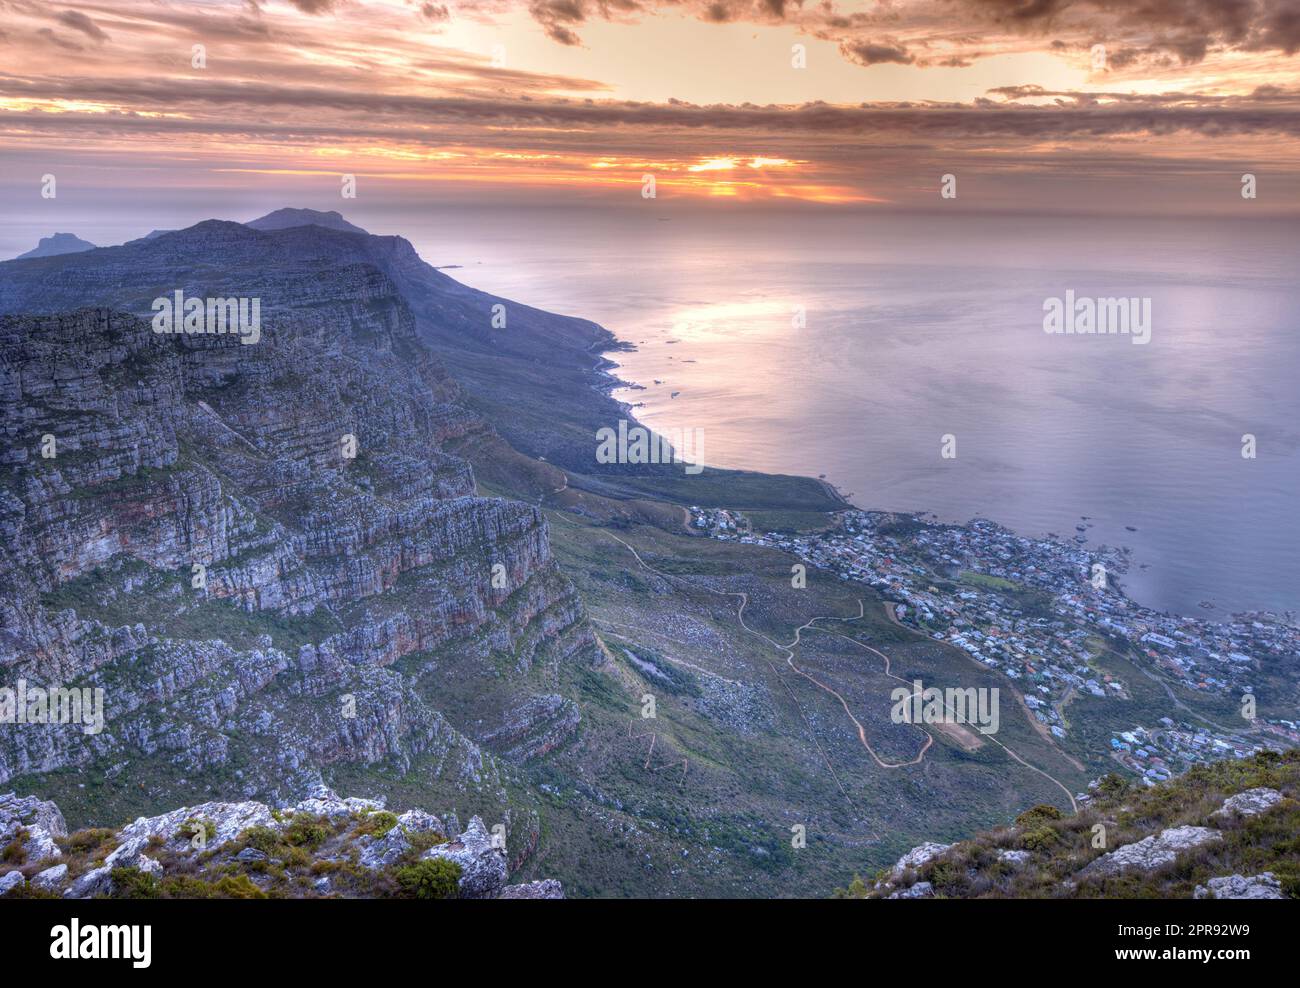 Beautiful view of an iconic landmark and famous travel or vacation destination to explore nature in South Africa. Aerial view of the sea and Table Mountain on a cloudy day at sunset with copy space. Stock Photo